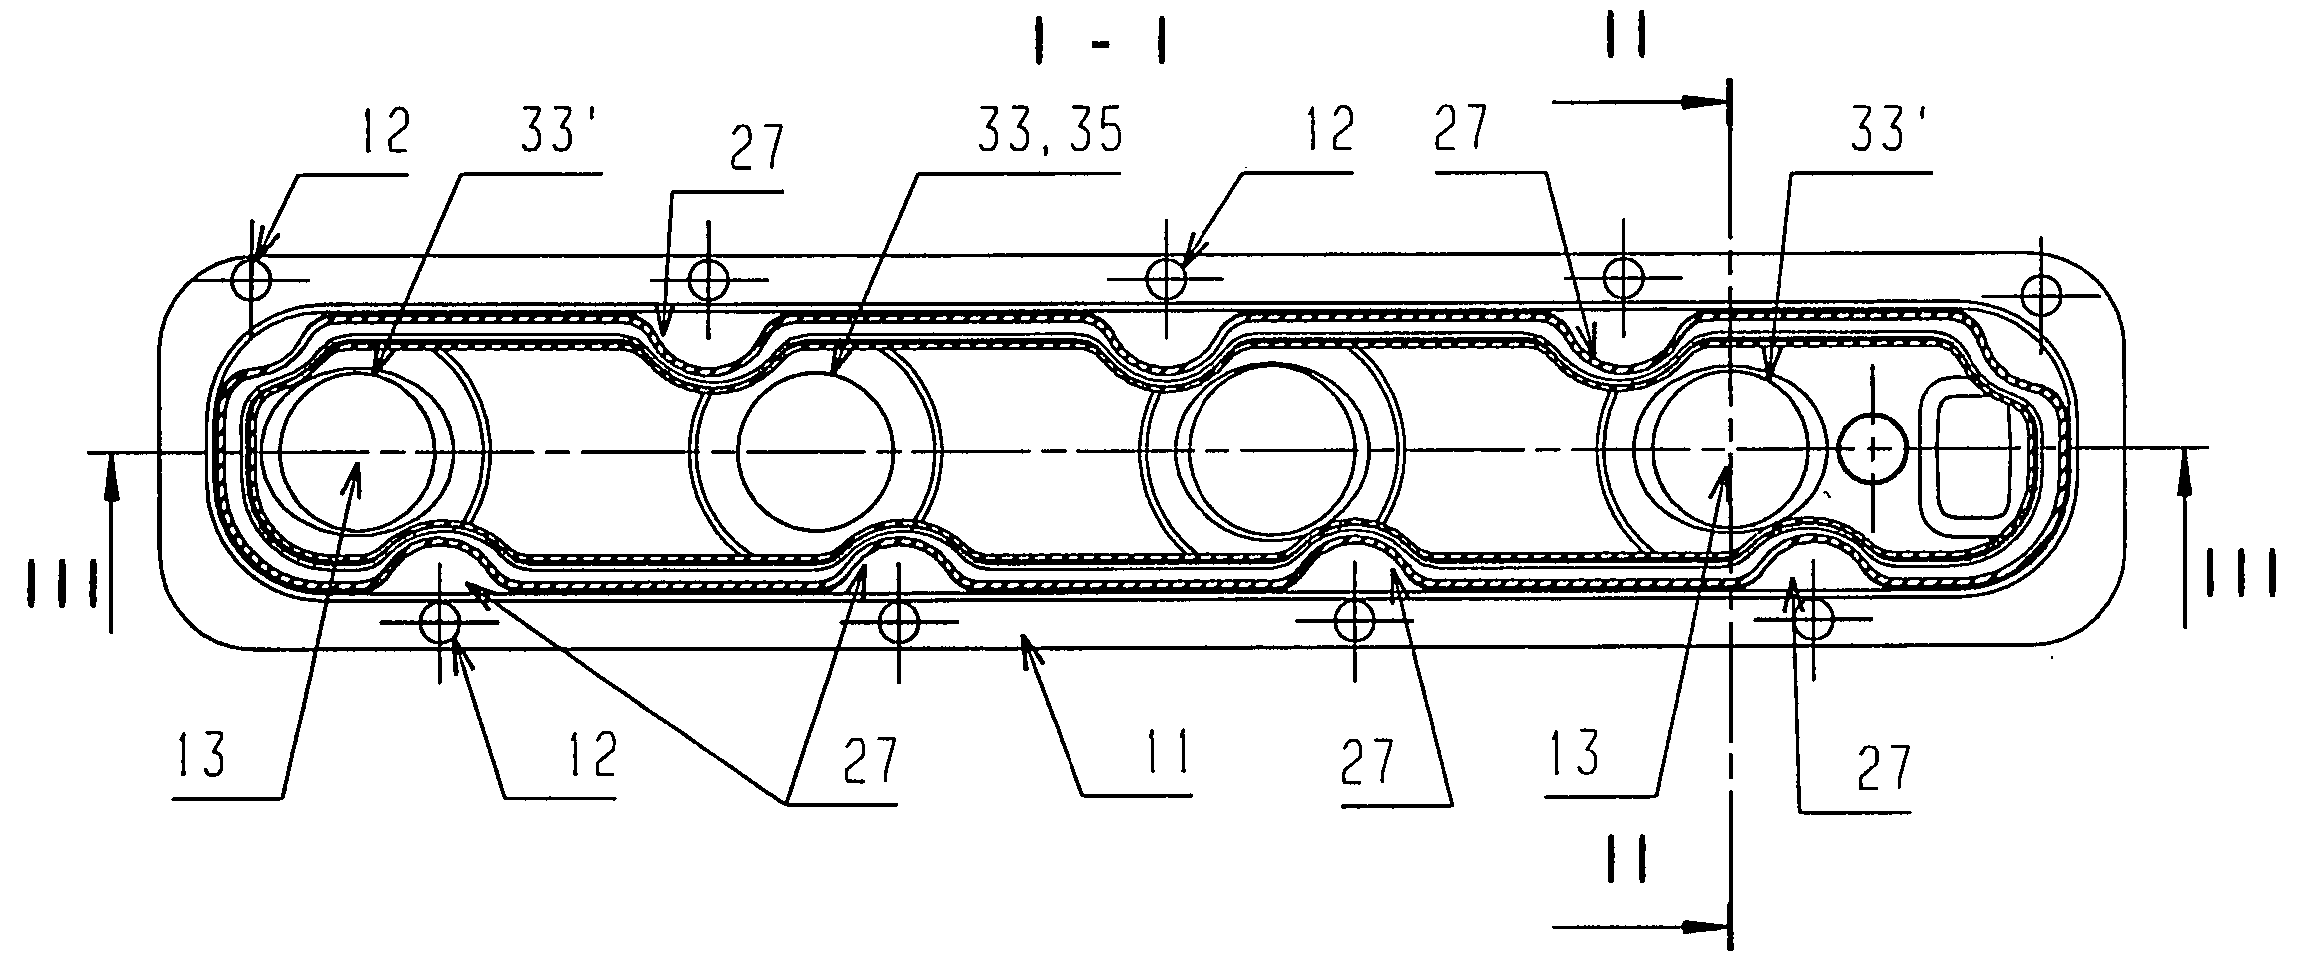 Air gap-insulated exhaust manifold for internal combustion engines